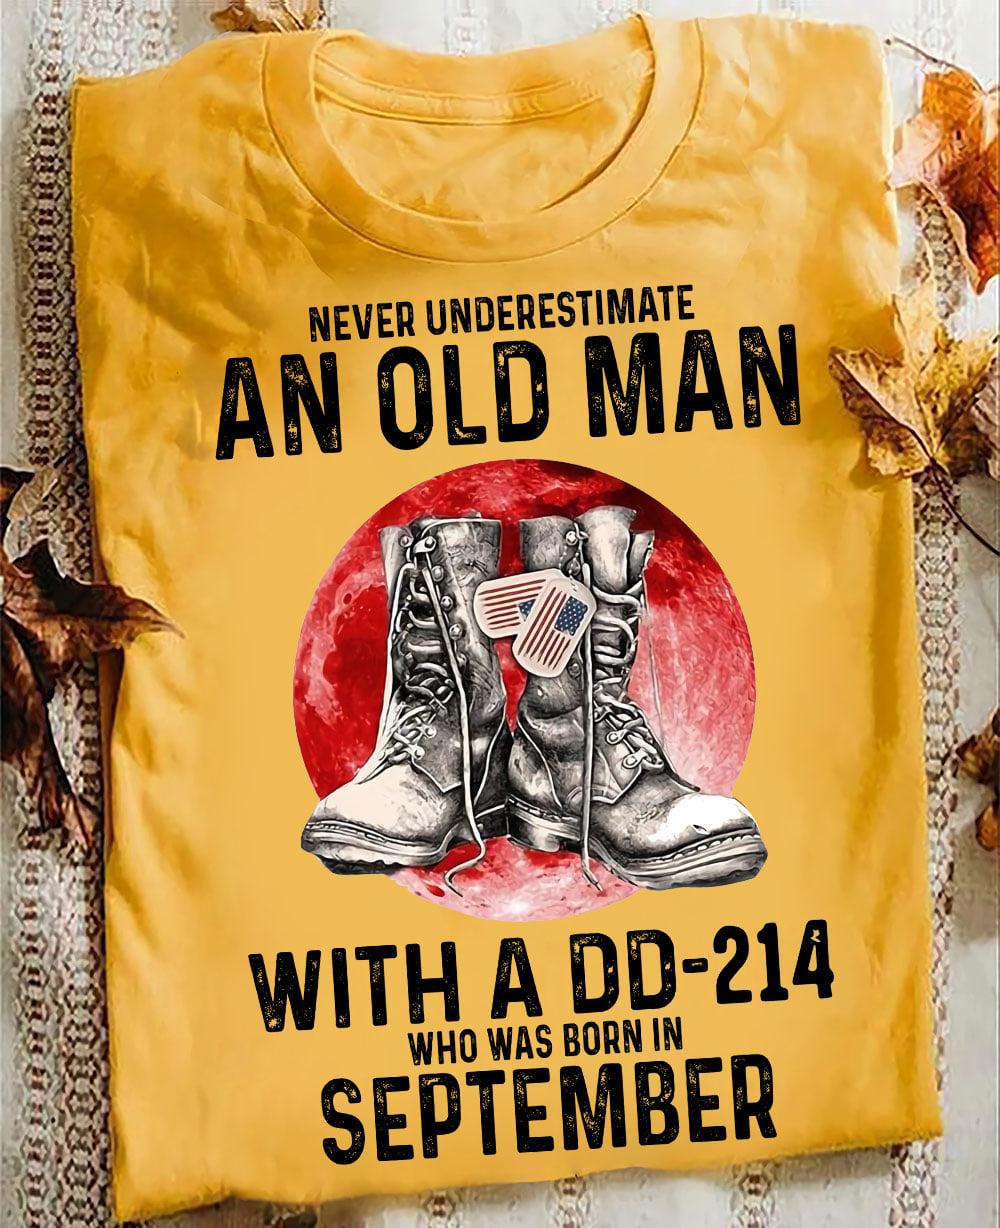 September Birthday Veteran - Never underestimate an old man with a dd-214 who was born in september